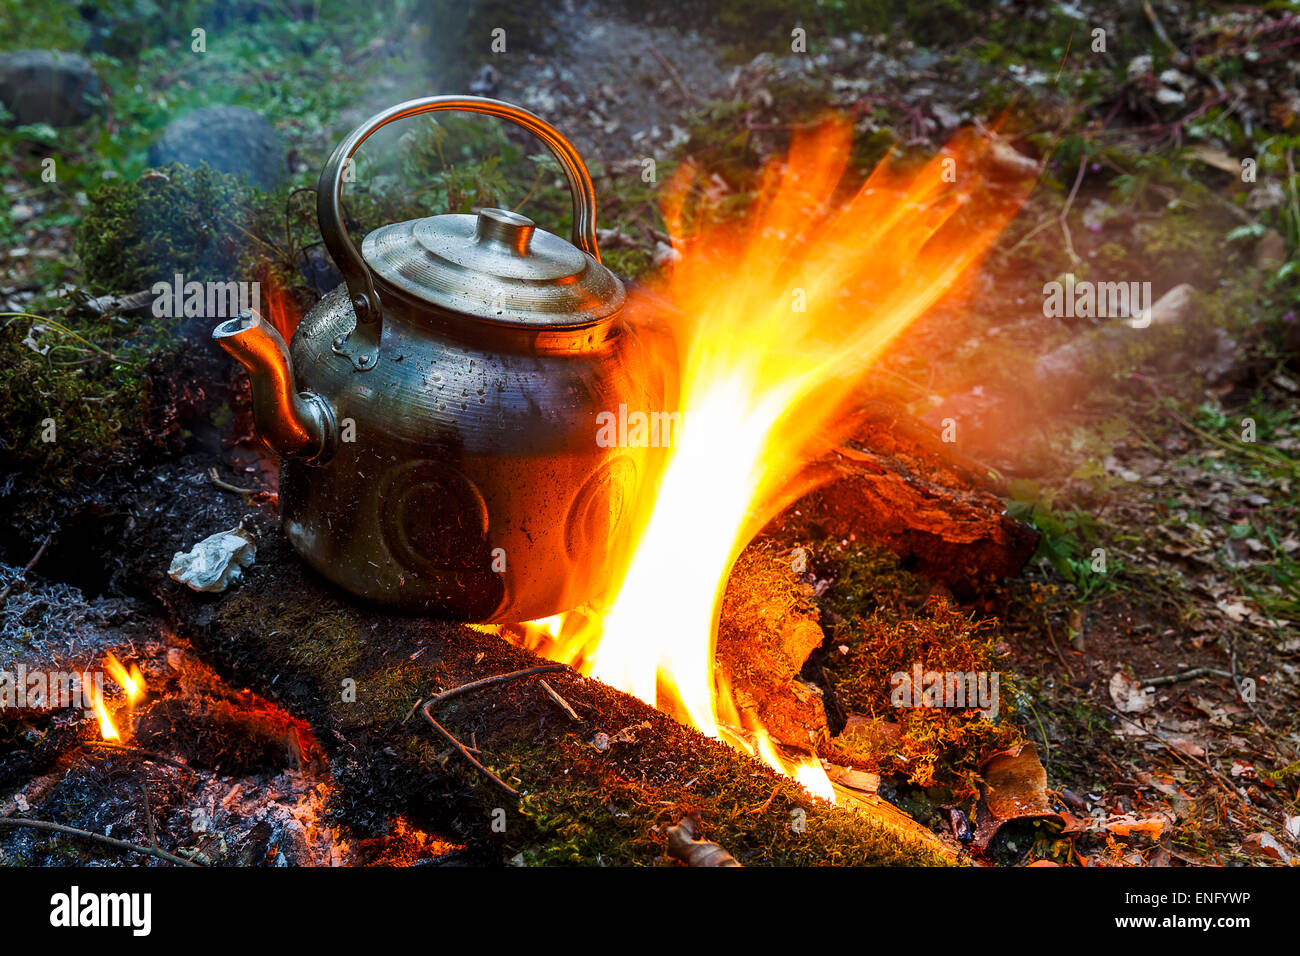 https://c8.alamy.com/comp/ENFYWP/marching-kettle-on-a-fire-in-the-forest-ENFYWP.jpg